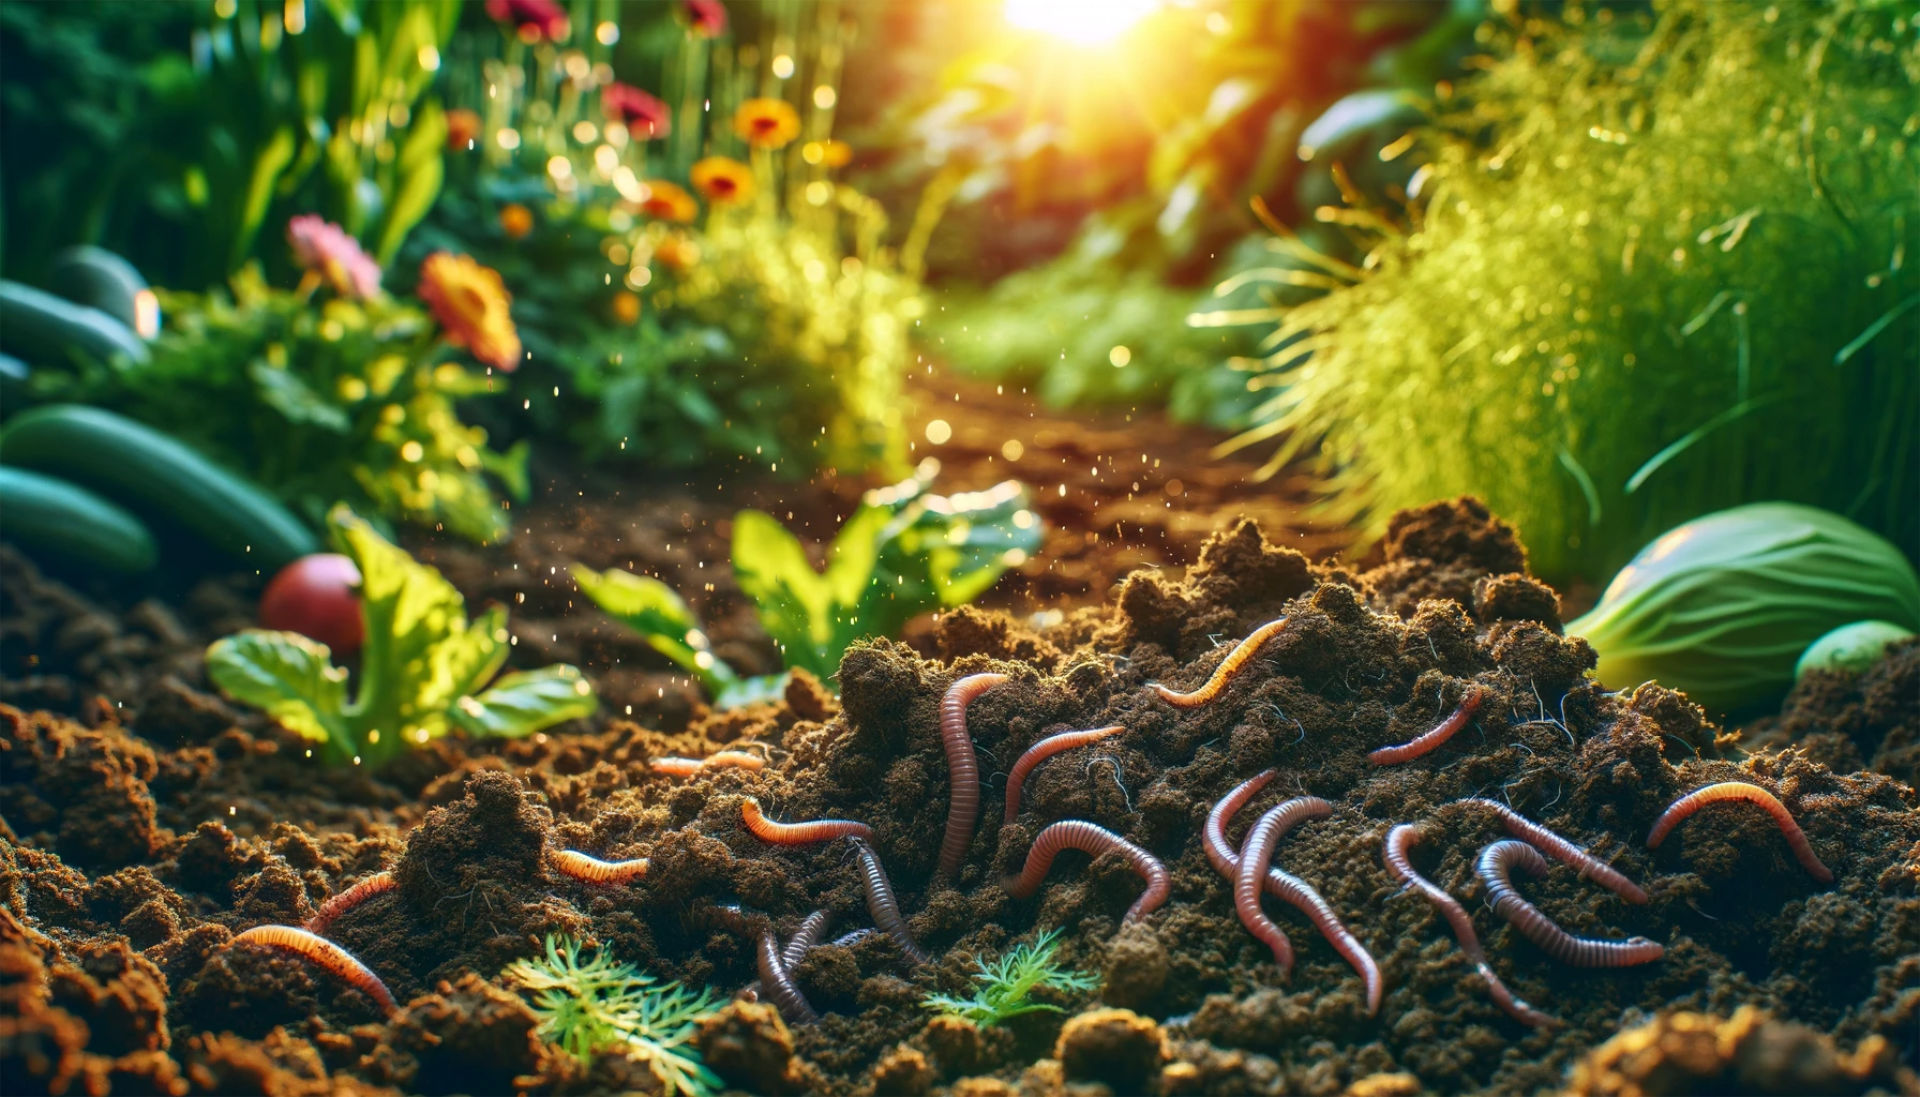 Soil Health and Biodynamic Practices: The first image vividly portrays the richness of biodynamic soil, teeming with life and organic matter. This visual captures the essence of sustainable soil management, integral to biodynamic gardening.